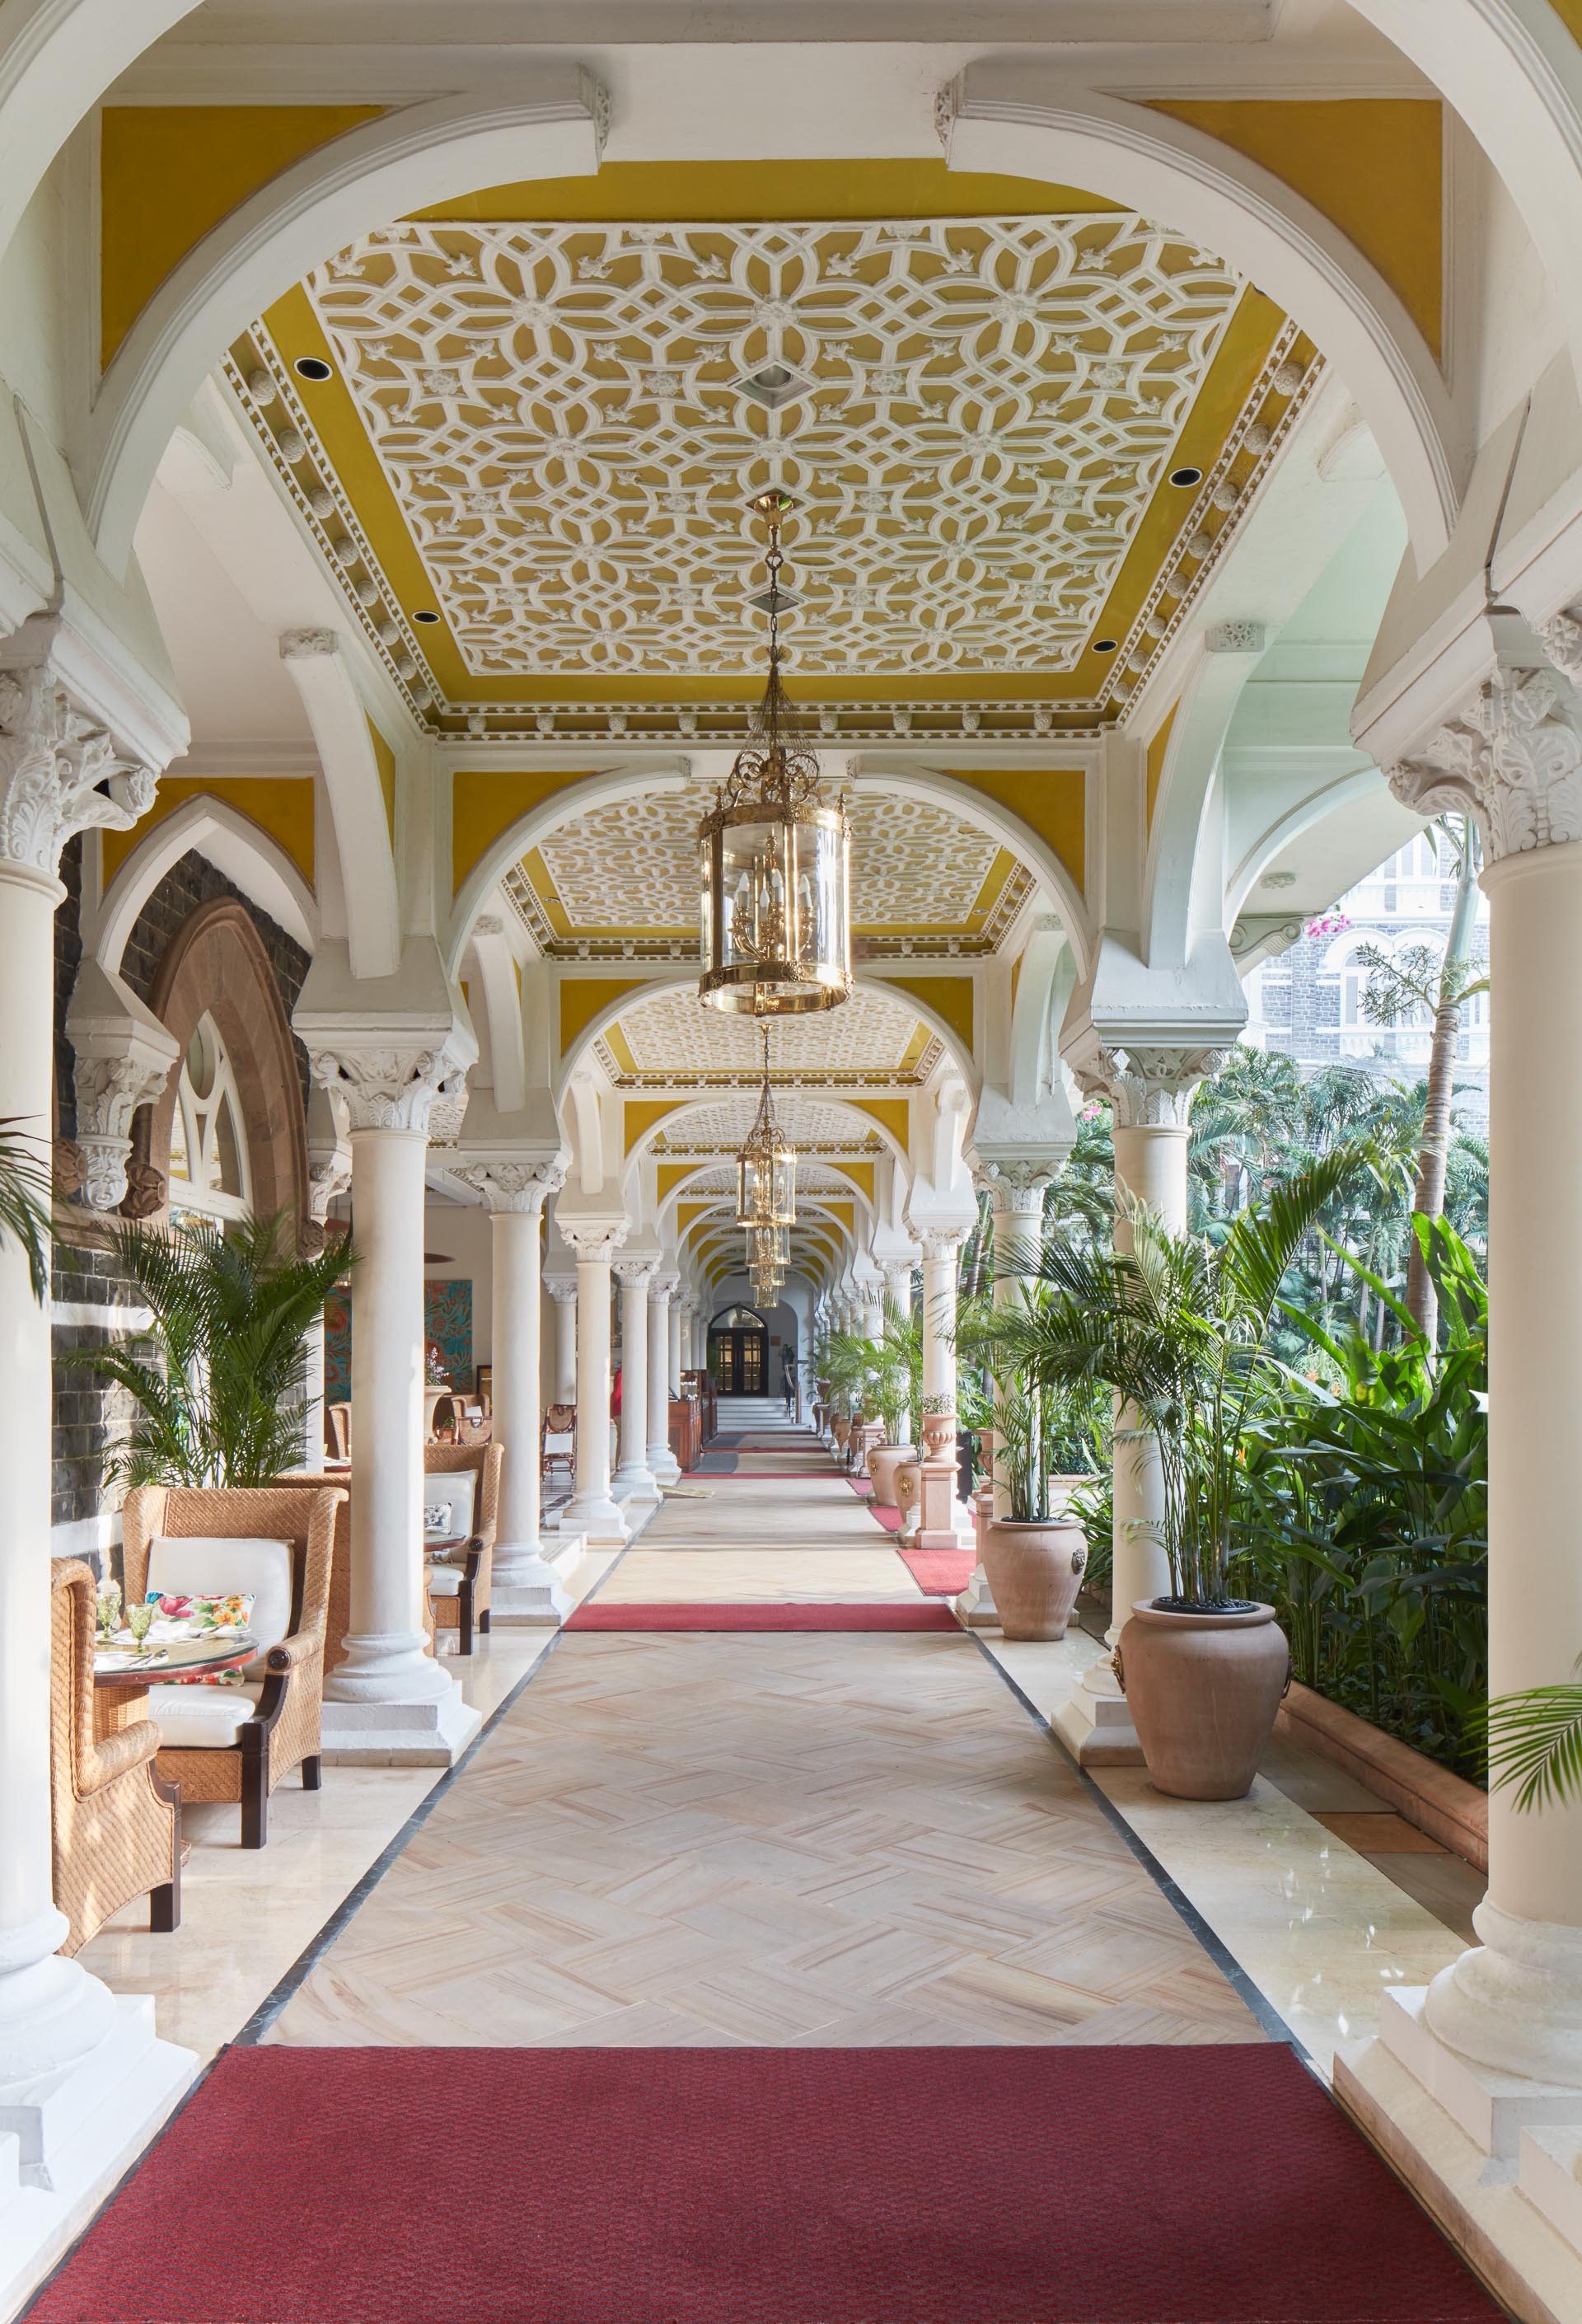 The Taj Mahal Palace | The Decadent Hotel that Was Home to India’s